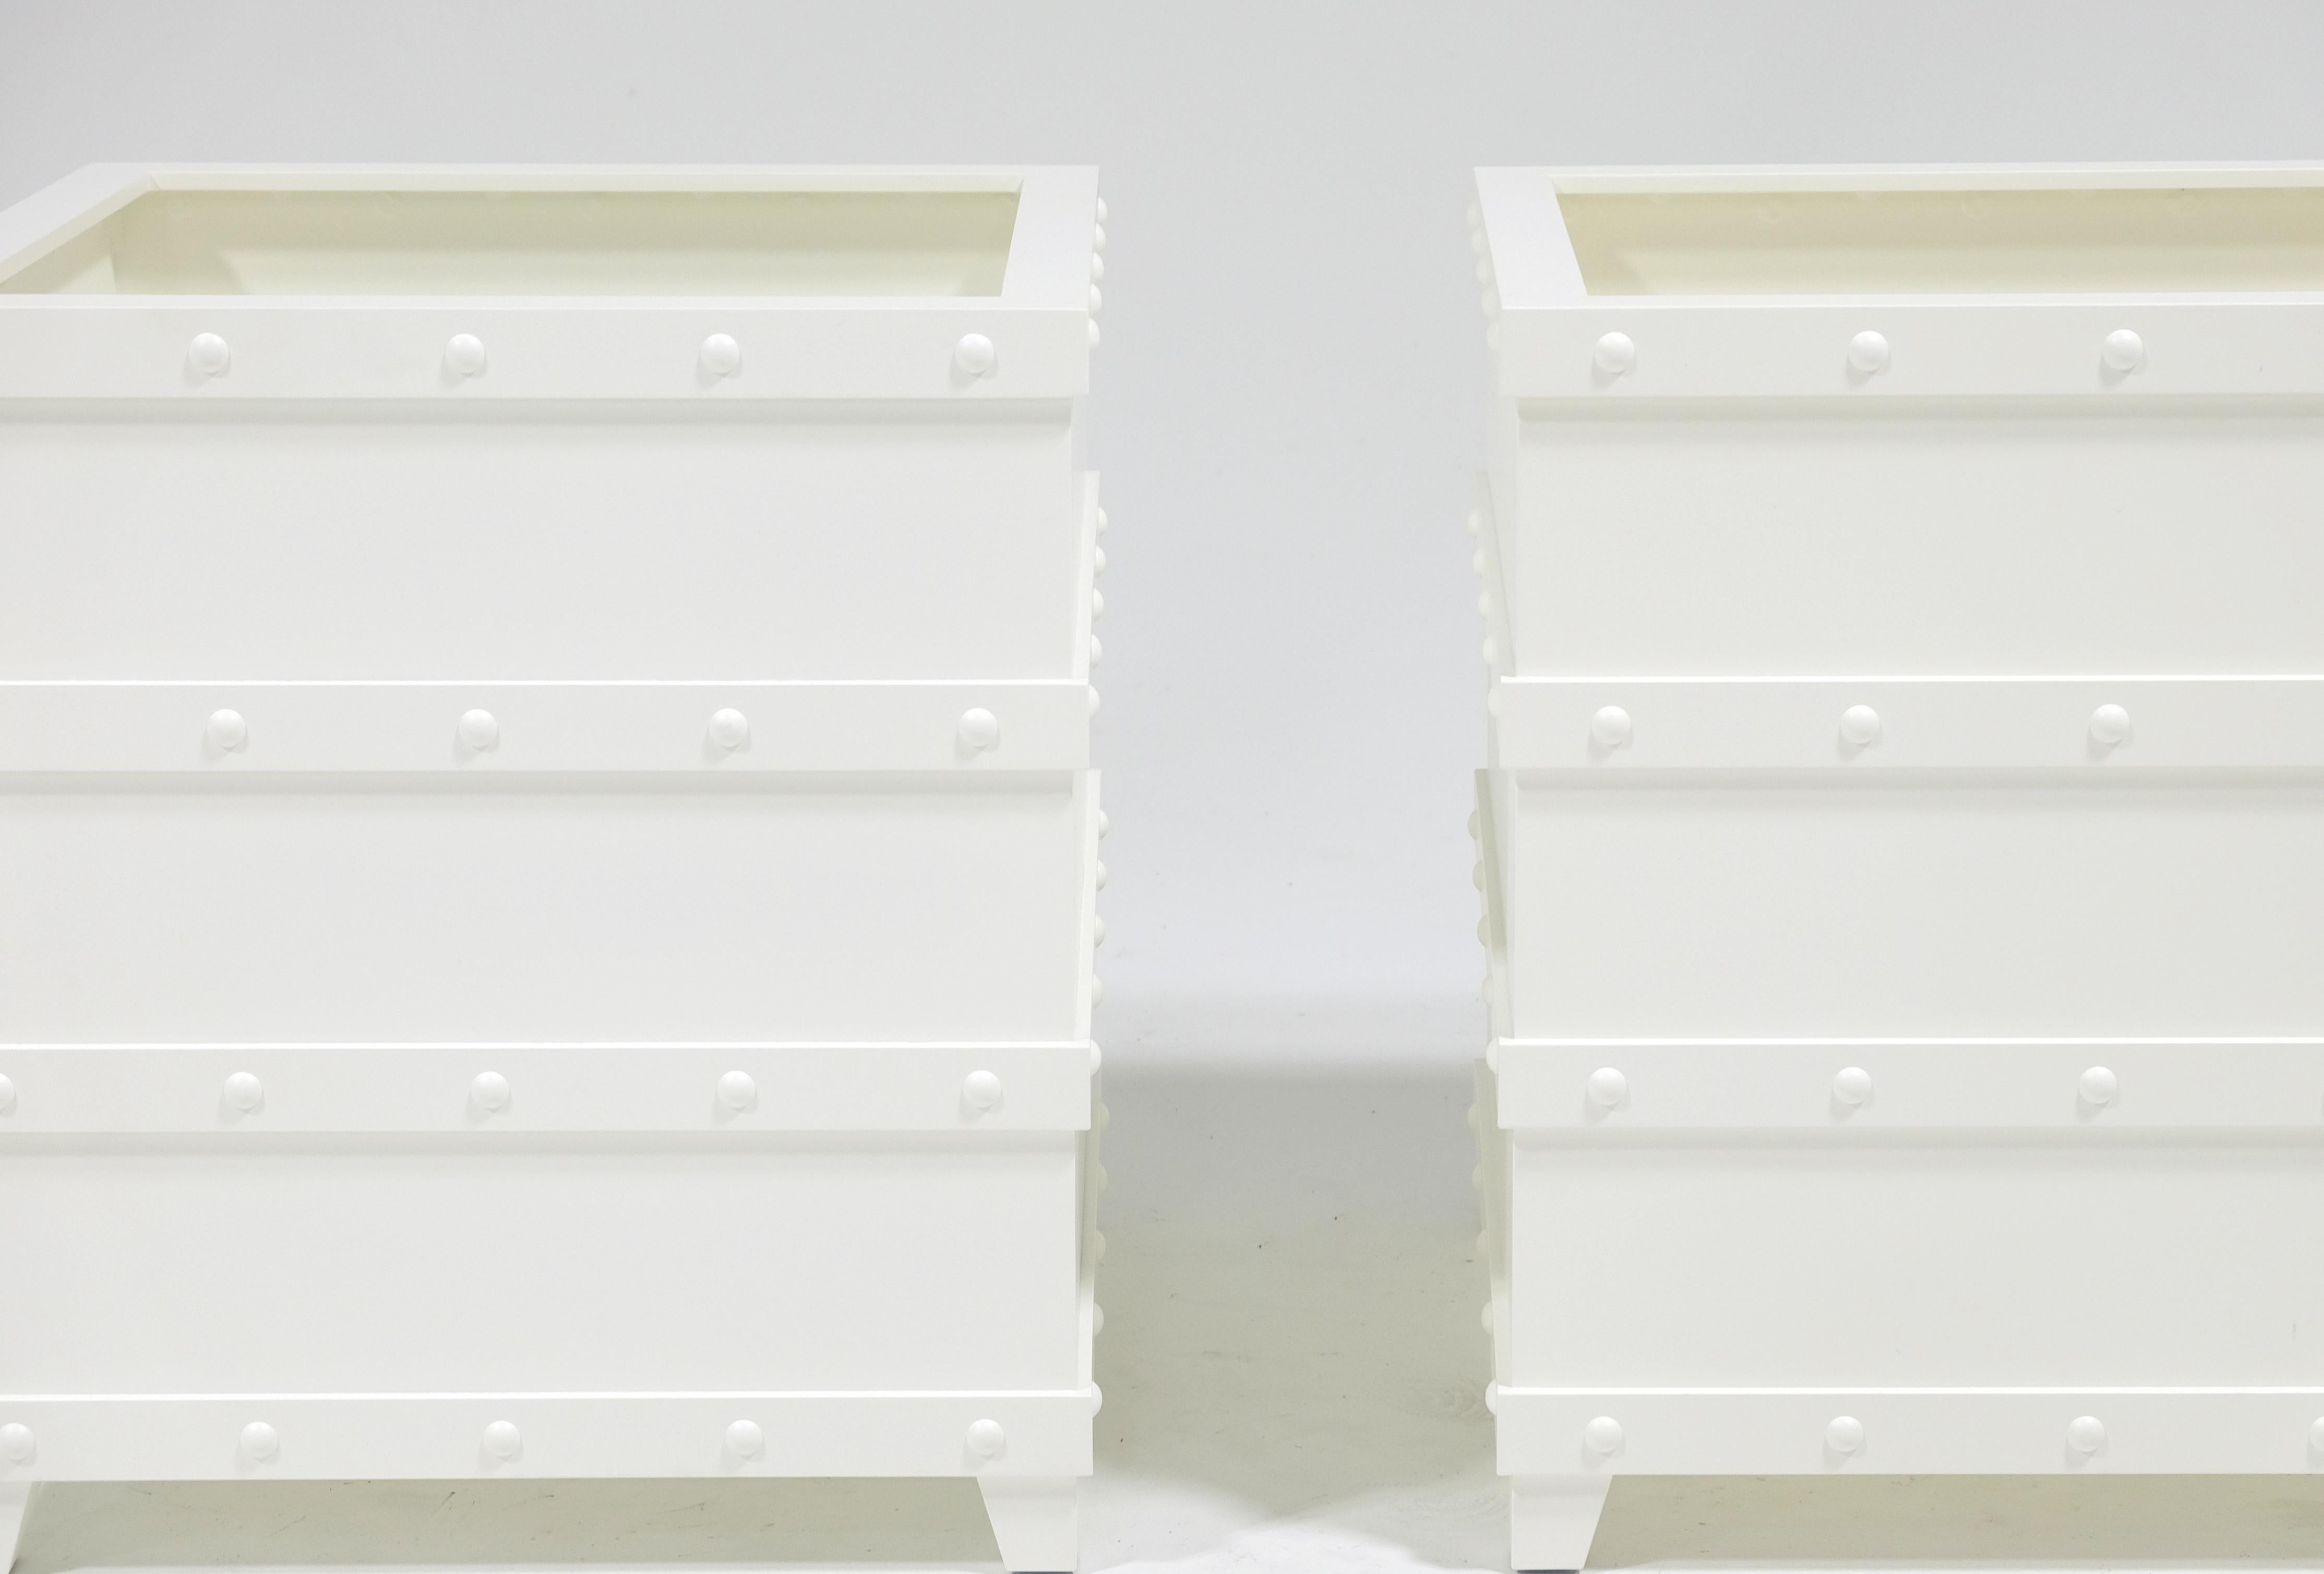 McKinnon and Harris pair of Inverlussa Palm boxes with Rivets in Classic white finish. High performance outdoor aluminum furniture for estate, garden, and yacht. Our signature Inverlussa banding is handcut, double mitered, drilled and rosette